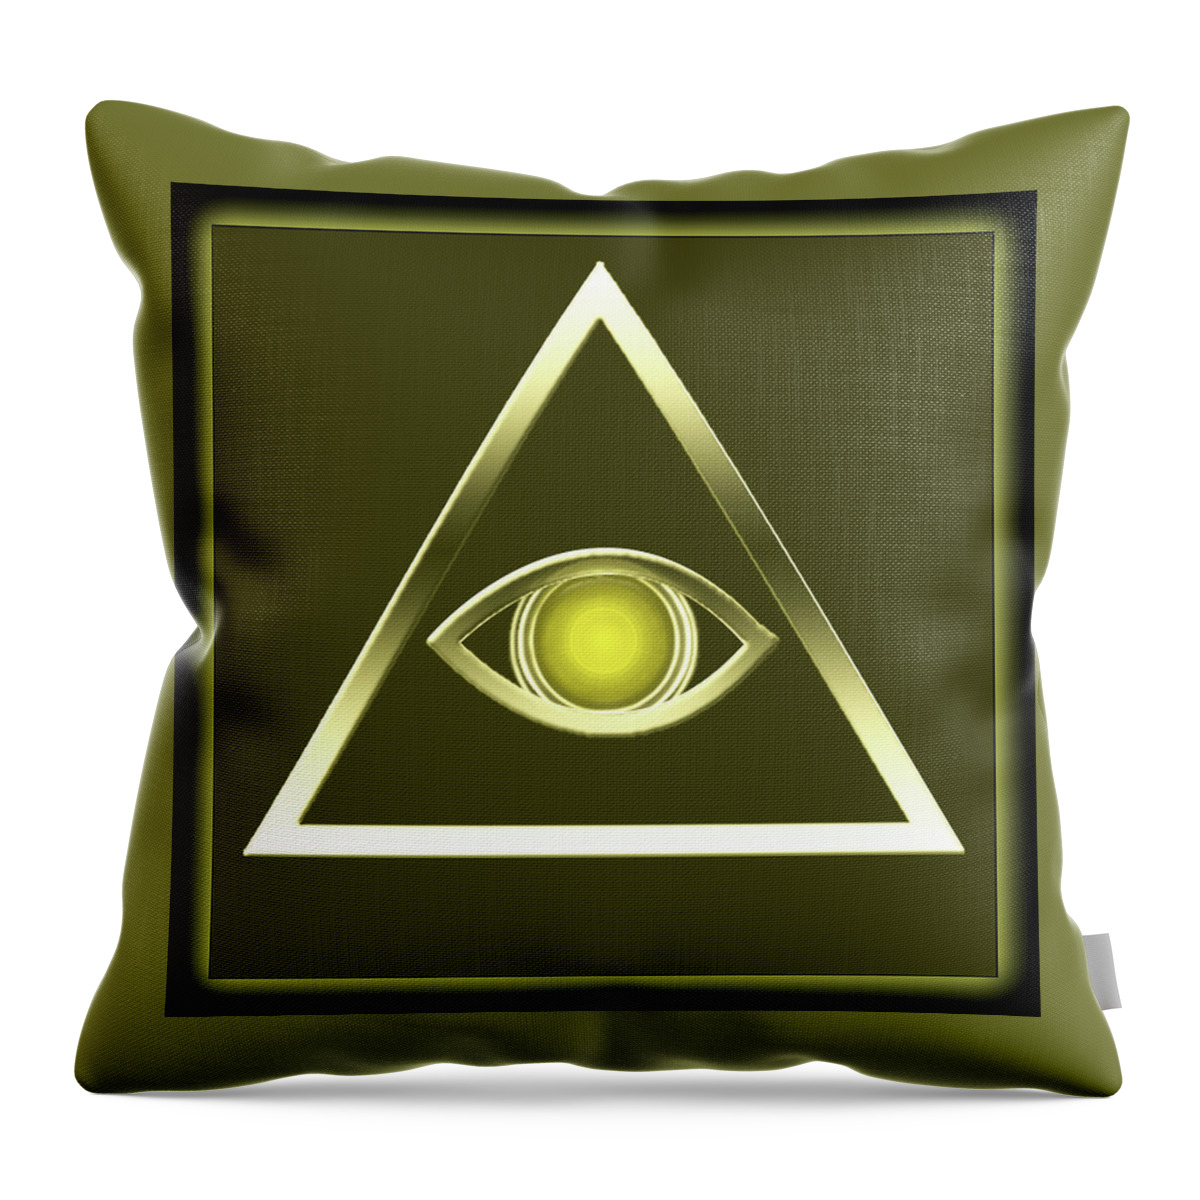 Hal Throw Pillow featuring the digital art Halcon V1e by Wunderle